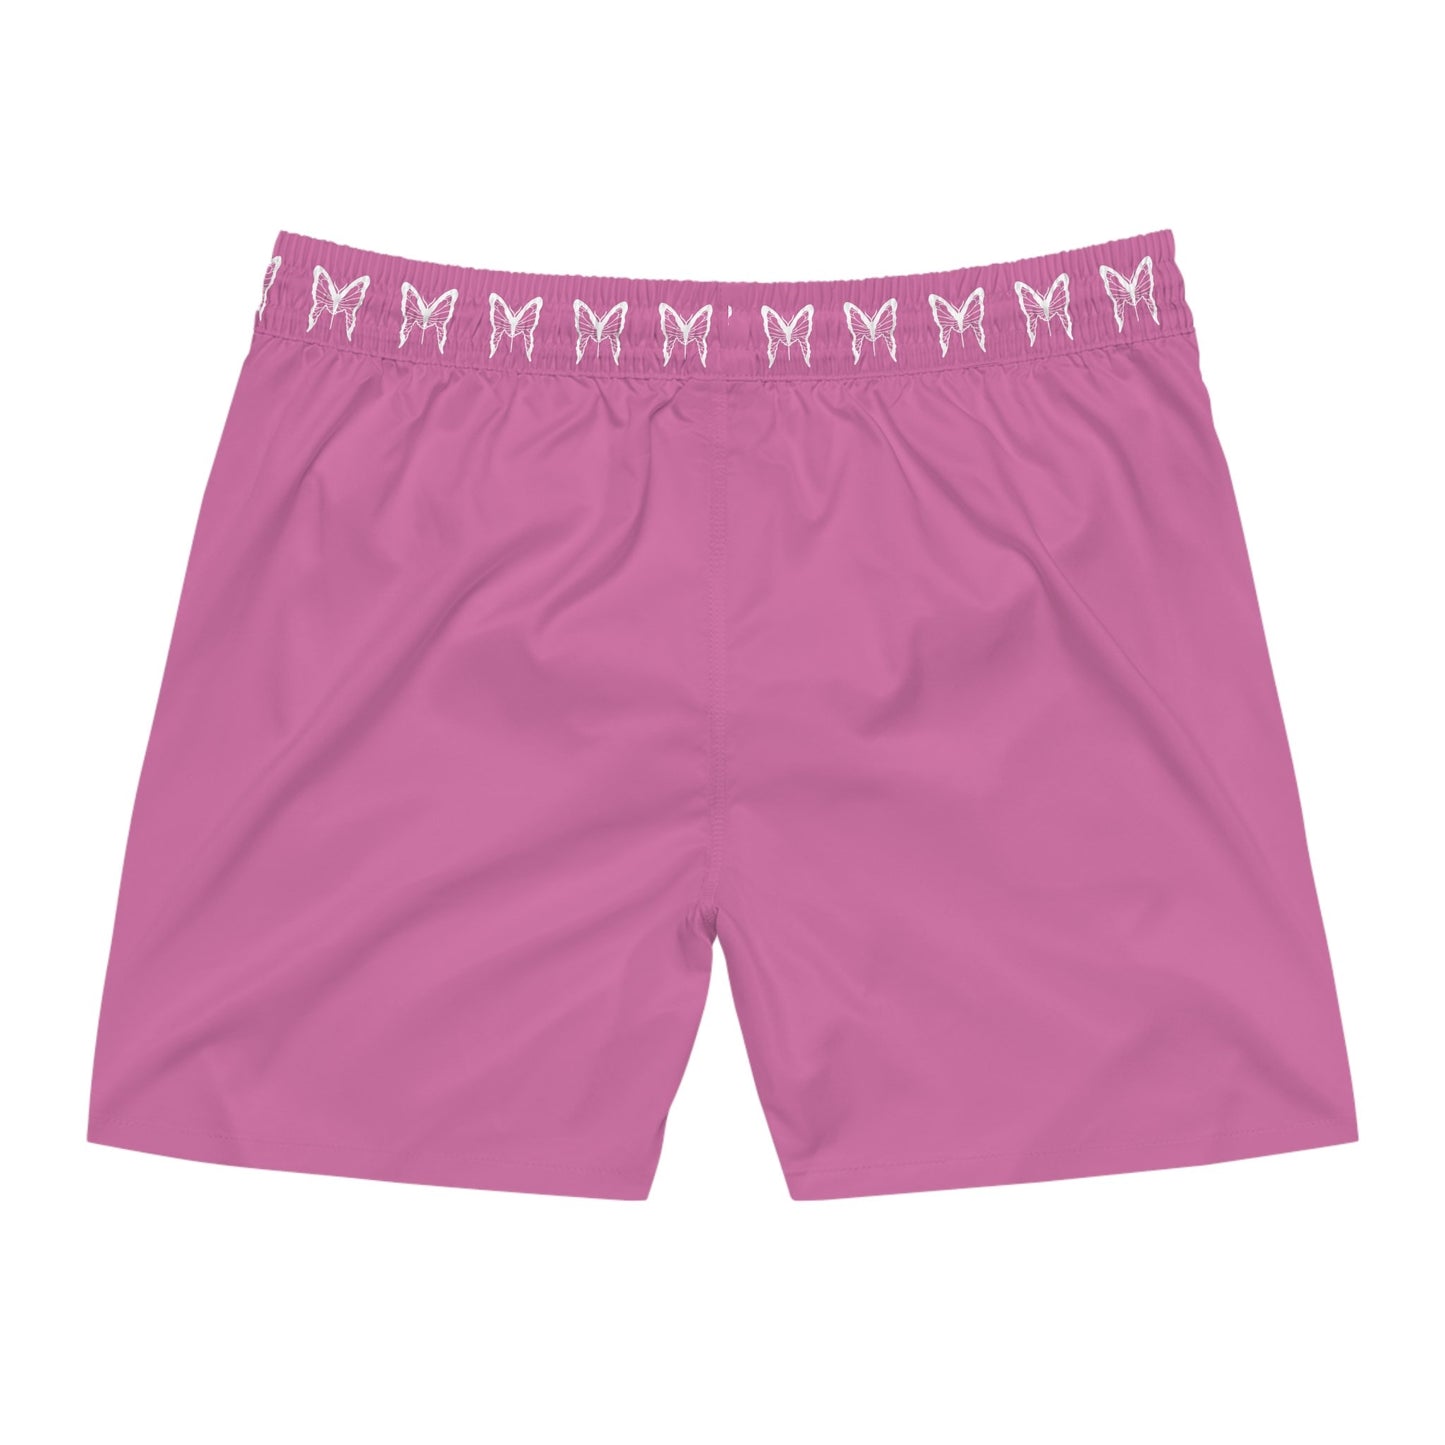 PINK BUTTERFLY EFFECT SWIMMING TRUNKS